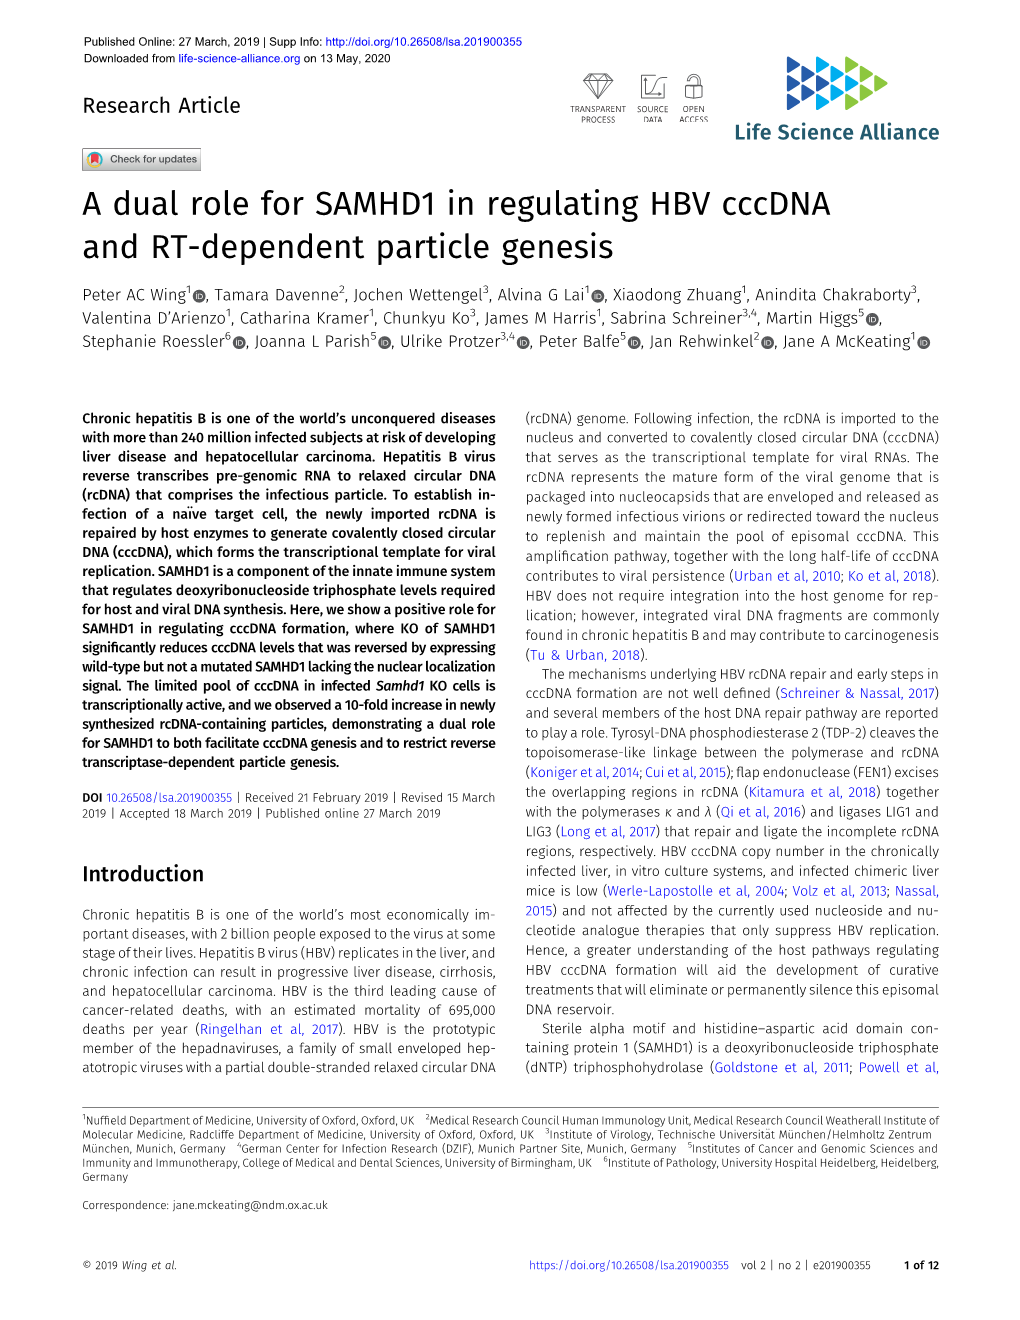 A Dual Role for SAMHD1 in Regulating HBV Cccdna and RT-Dependent Particle Genesis